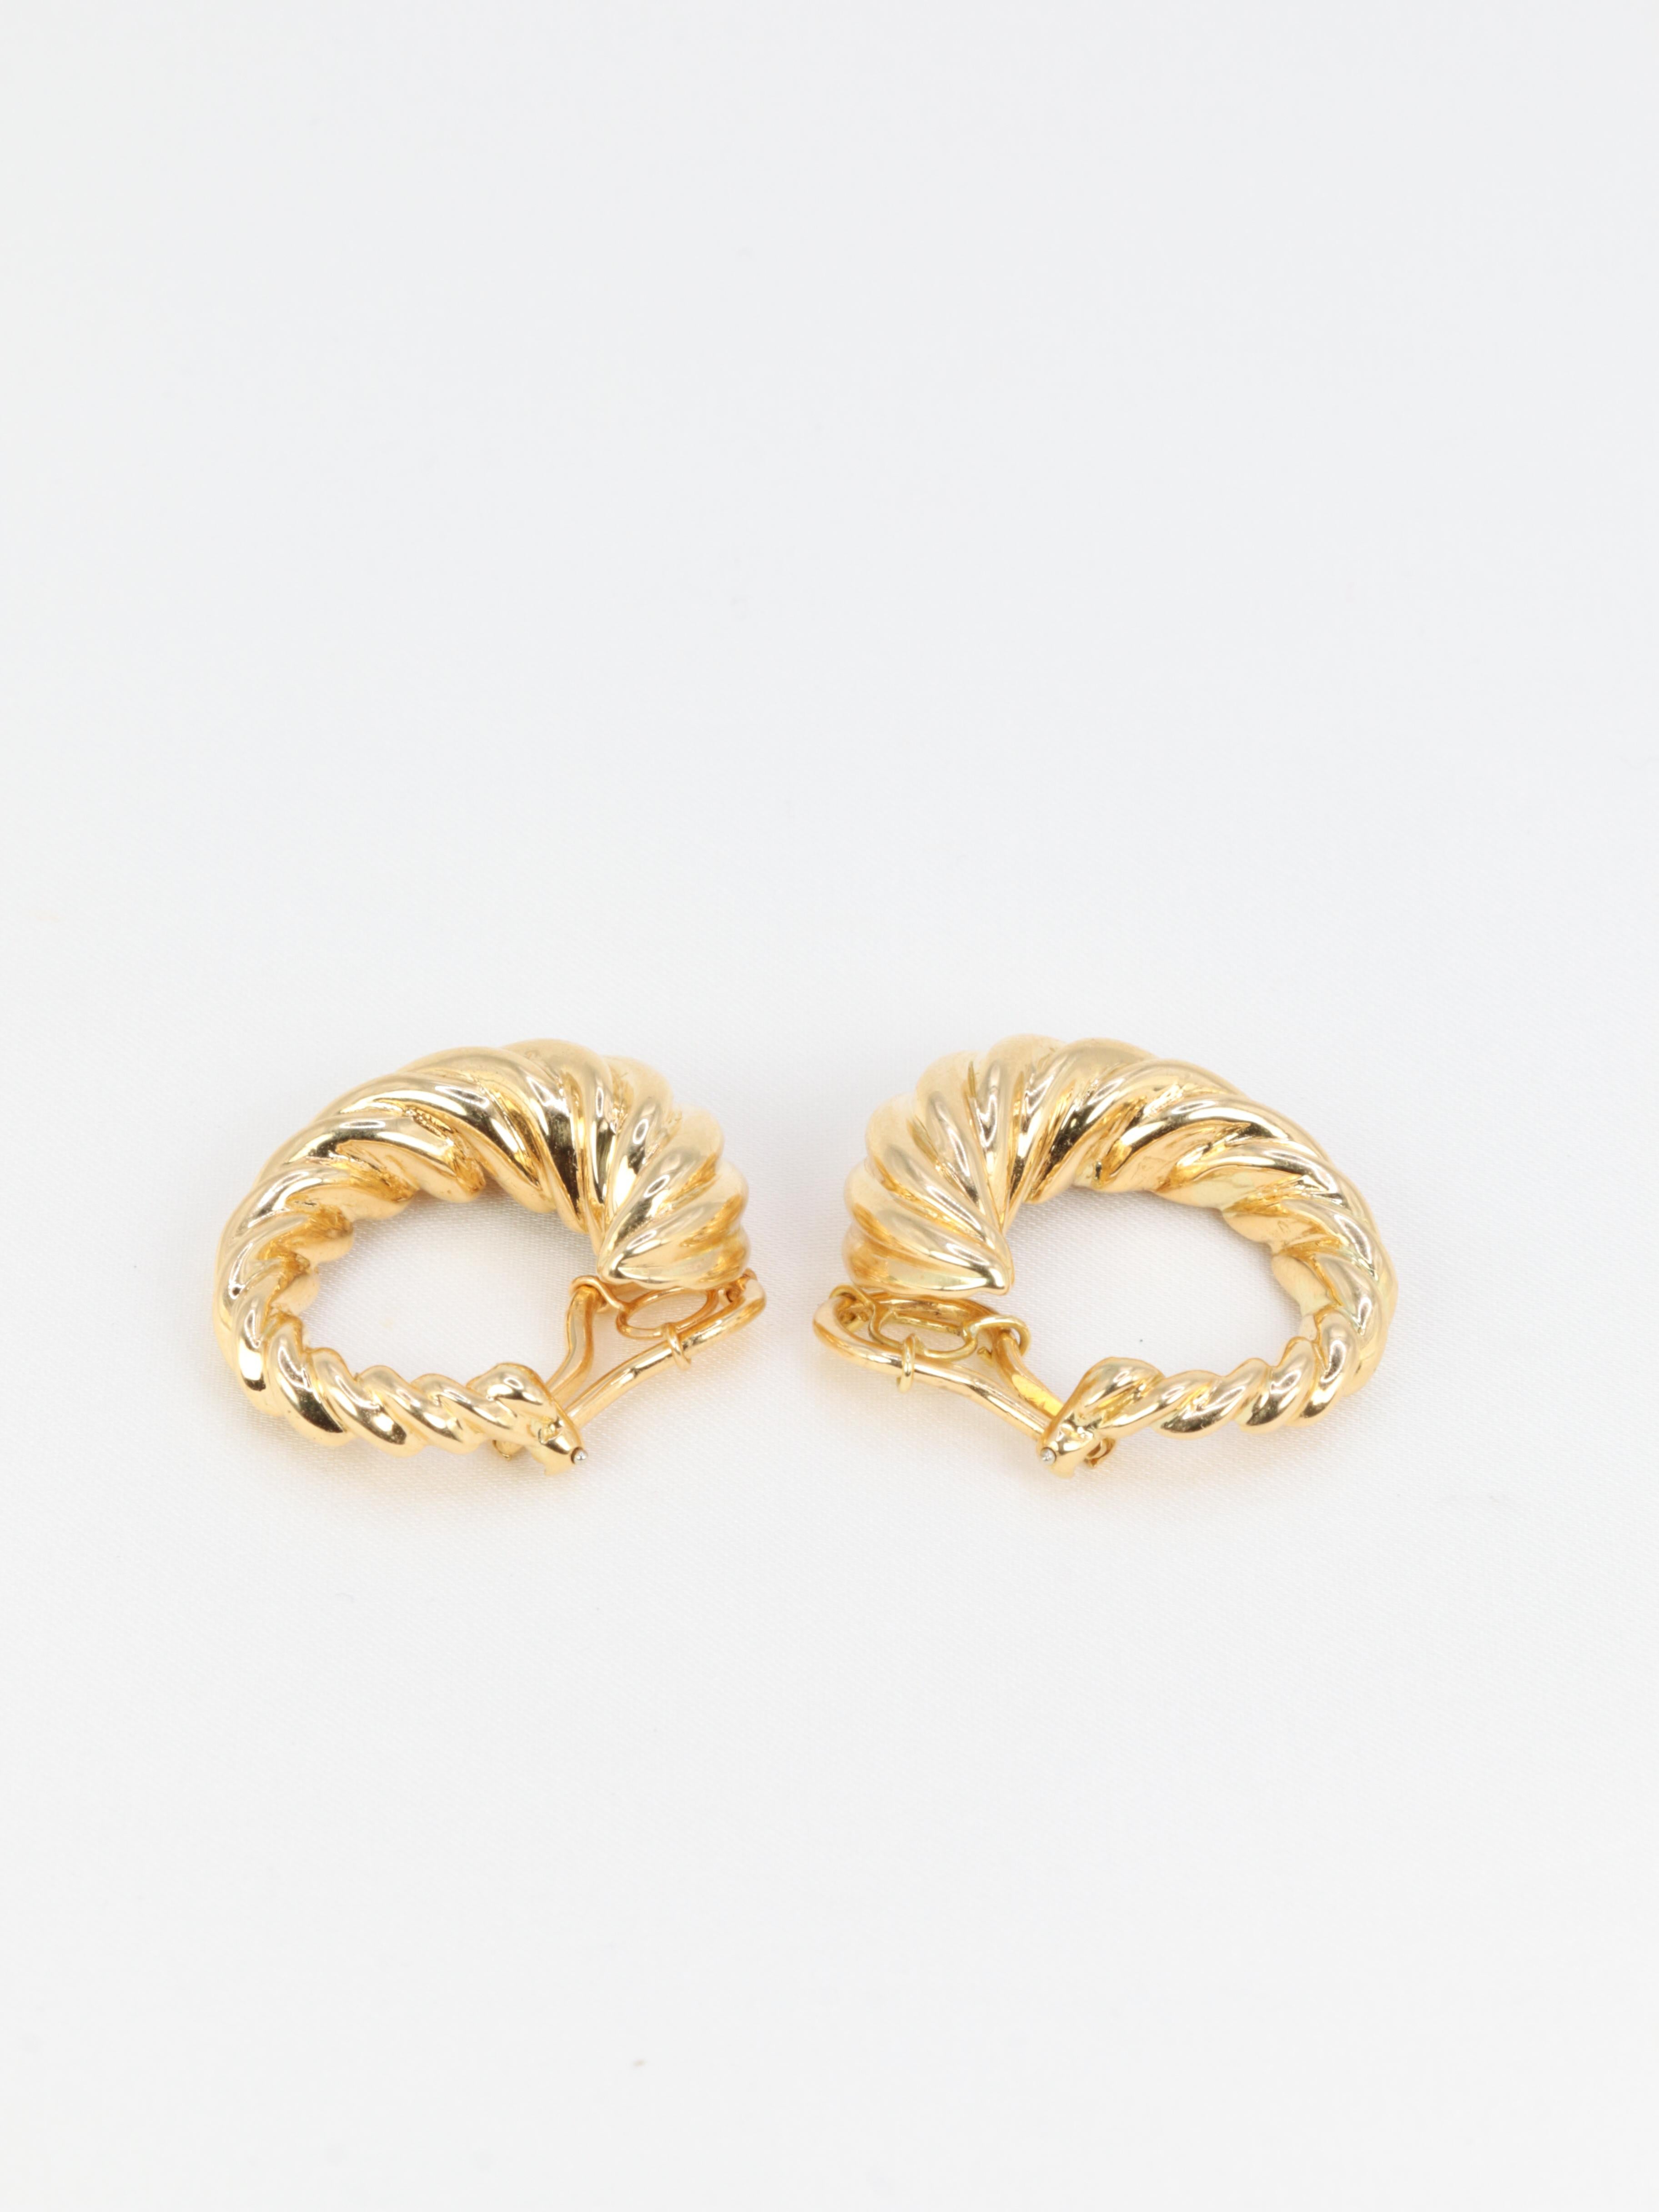 Pair of Vintage Ear Clips in Yellow Gold 3